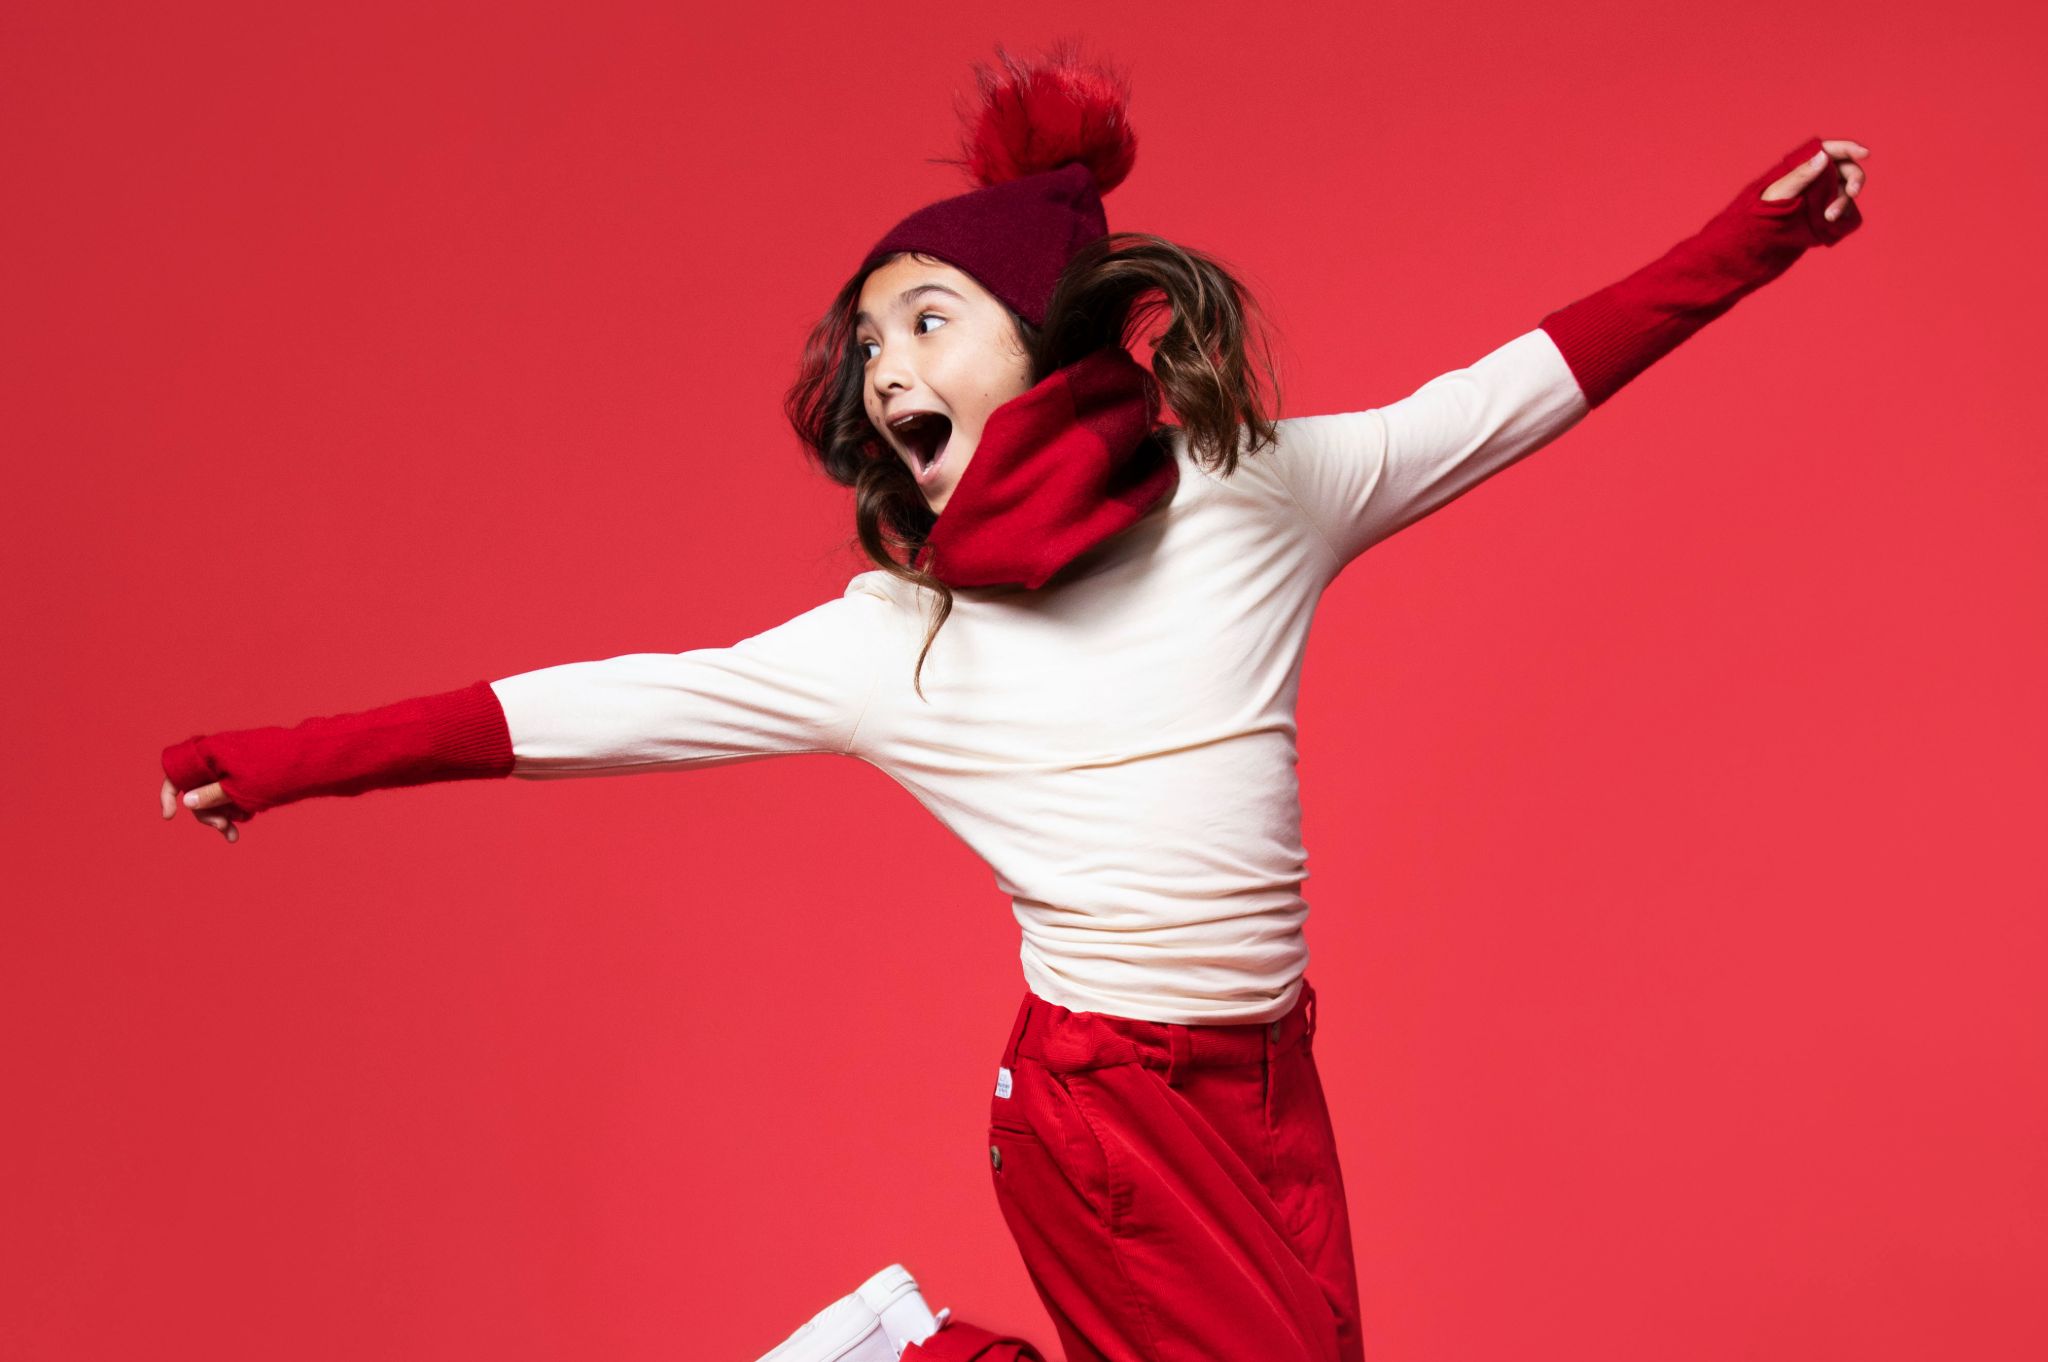 Why your Ecommerce Brand Should Start Creating TikTok Content Side profile of girl model wearing a red cap, scarf, hand sleeves and pants jumping and looking off to the side smiling against a red backdrop